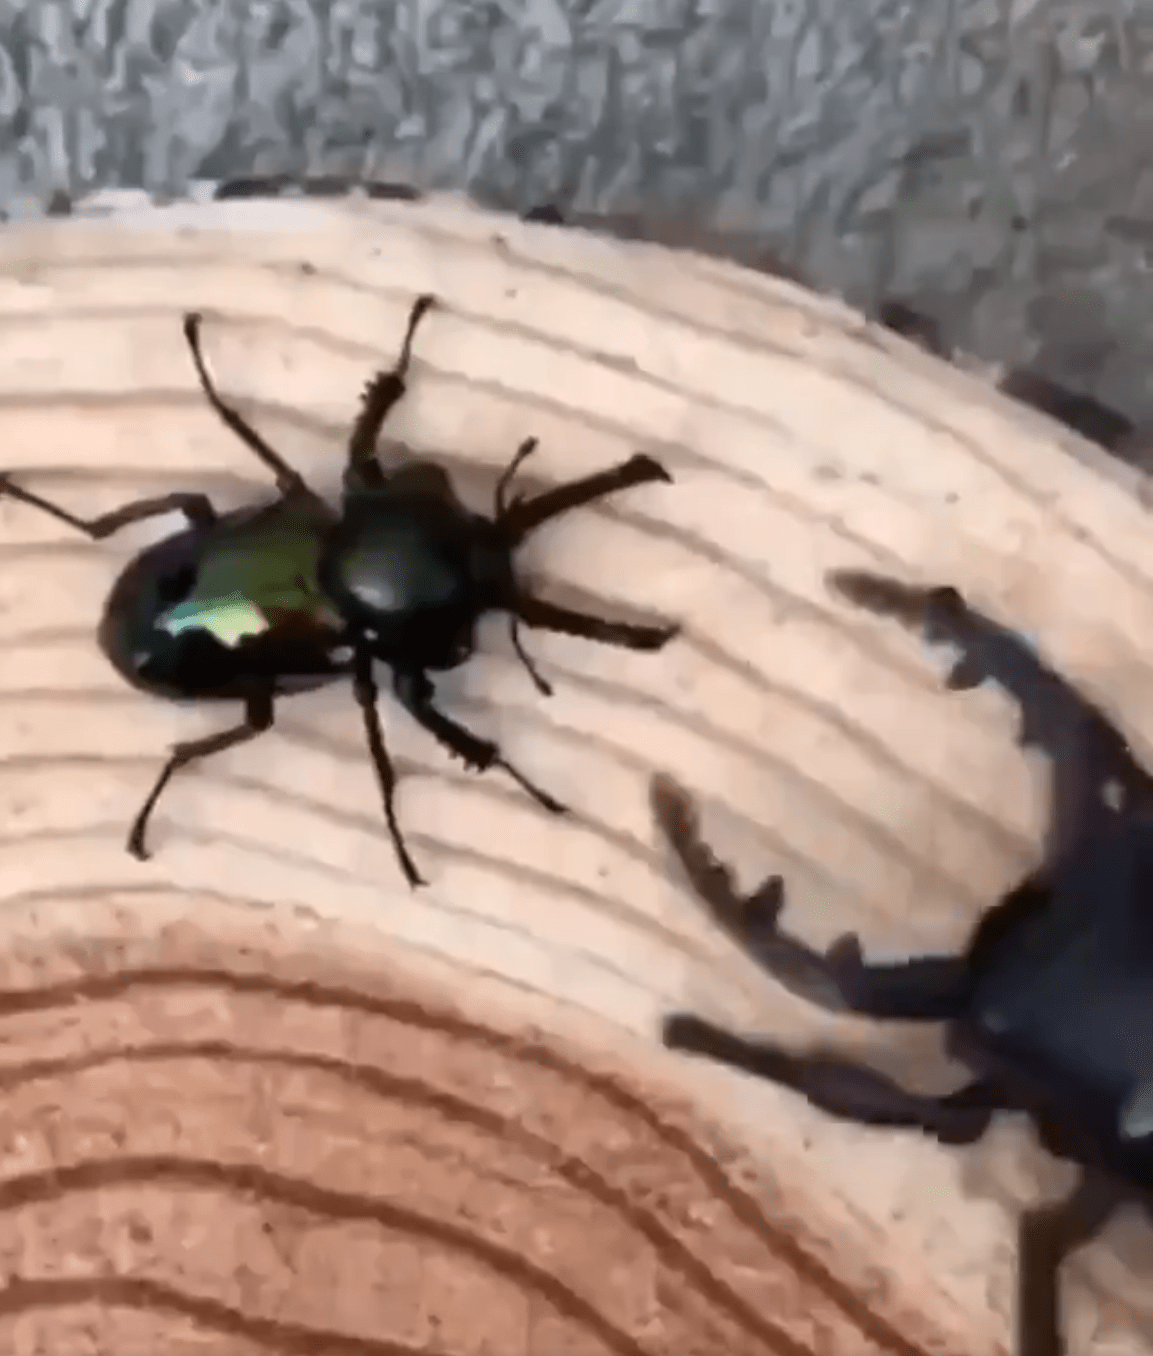 A viral video shows a live beetle (left) wrestling with a giant robot one